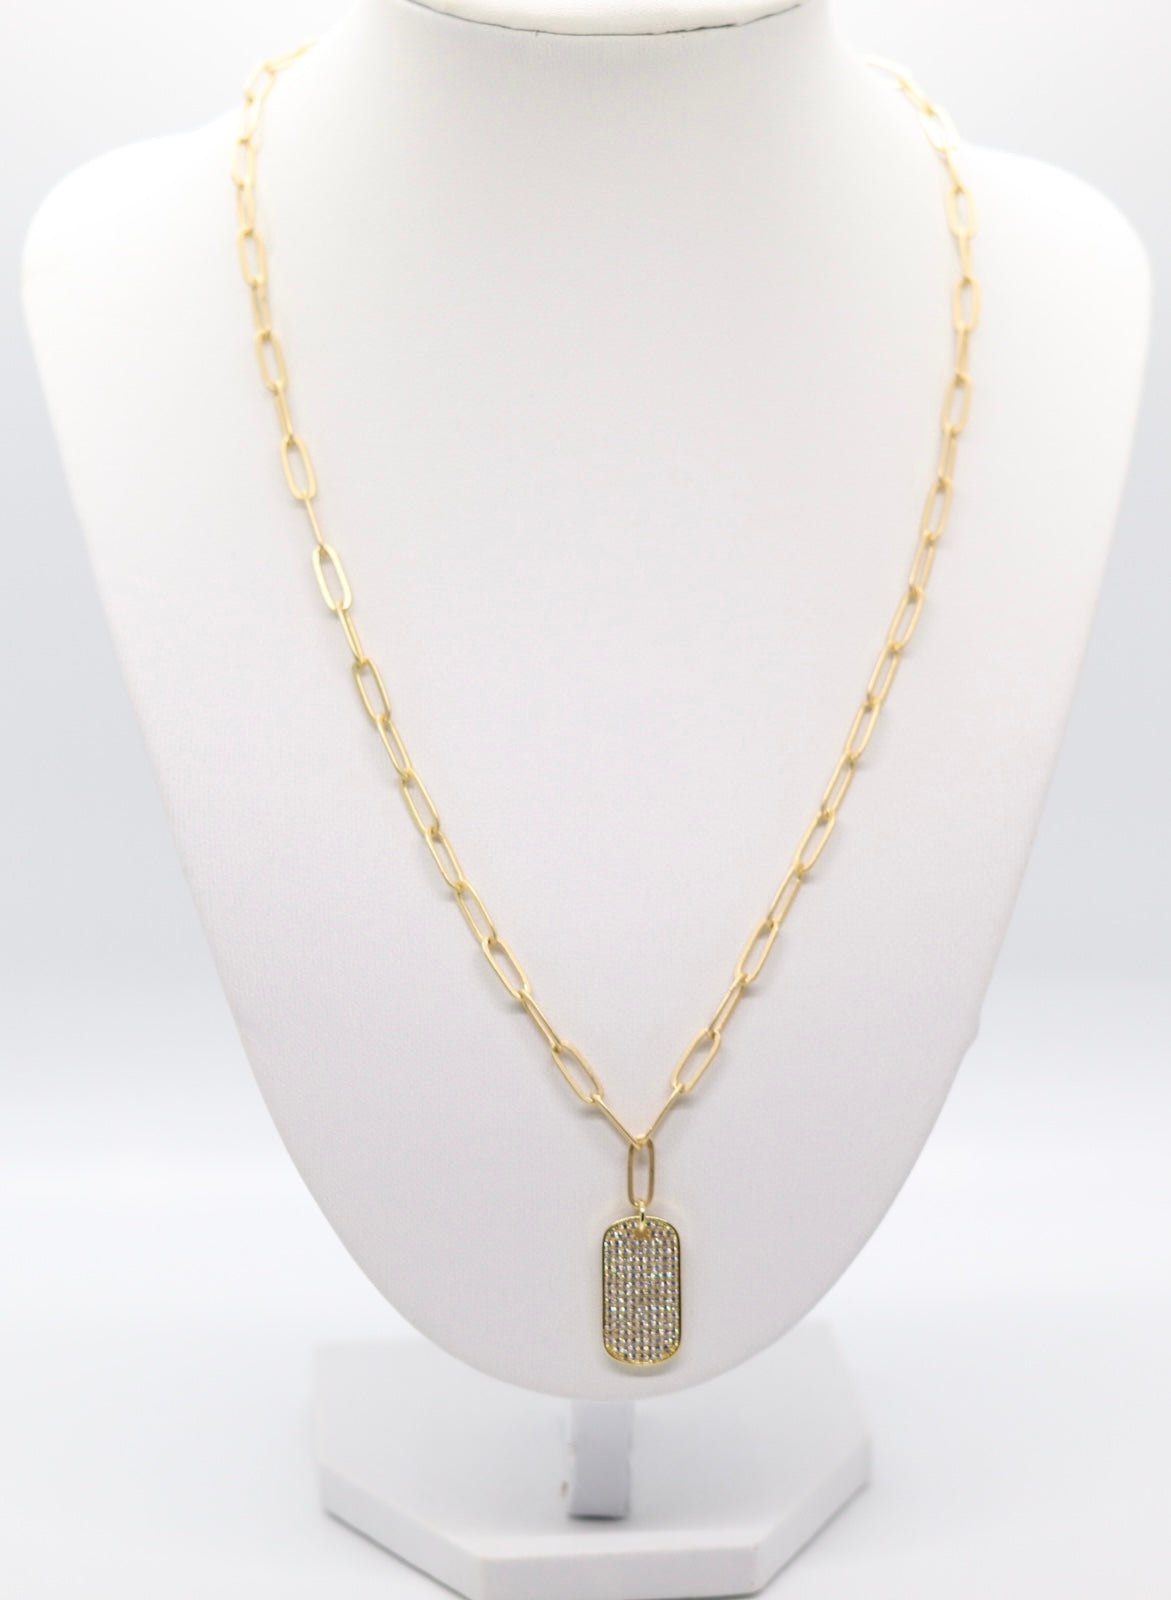 Gold 3.8mm Link Chain with Rectangle Diamond Paved Pendant - 18 inches